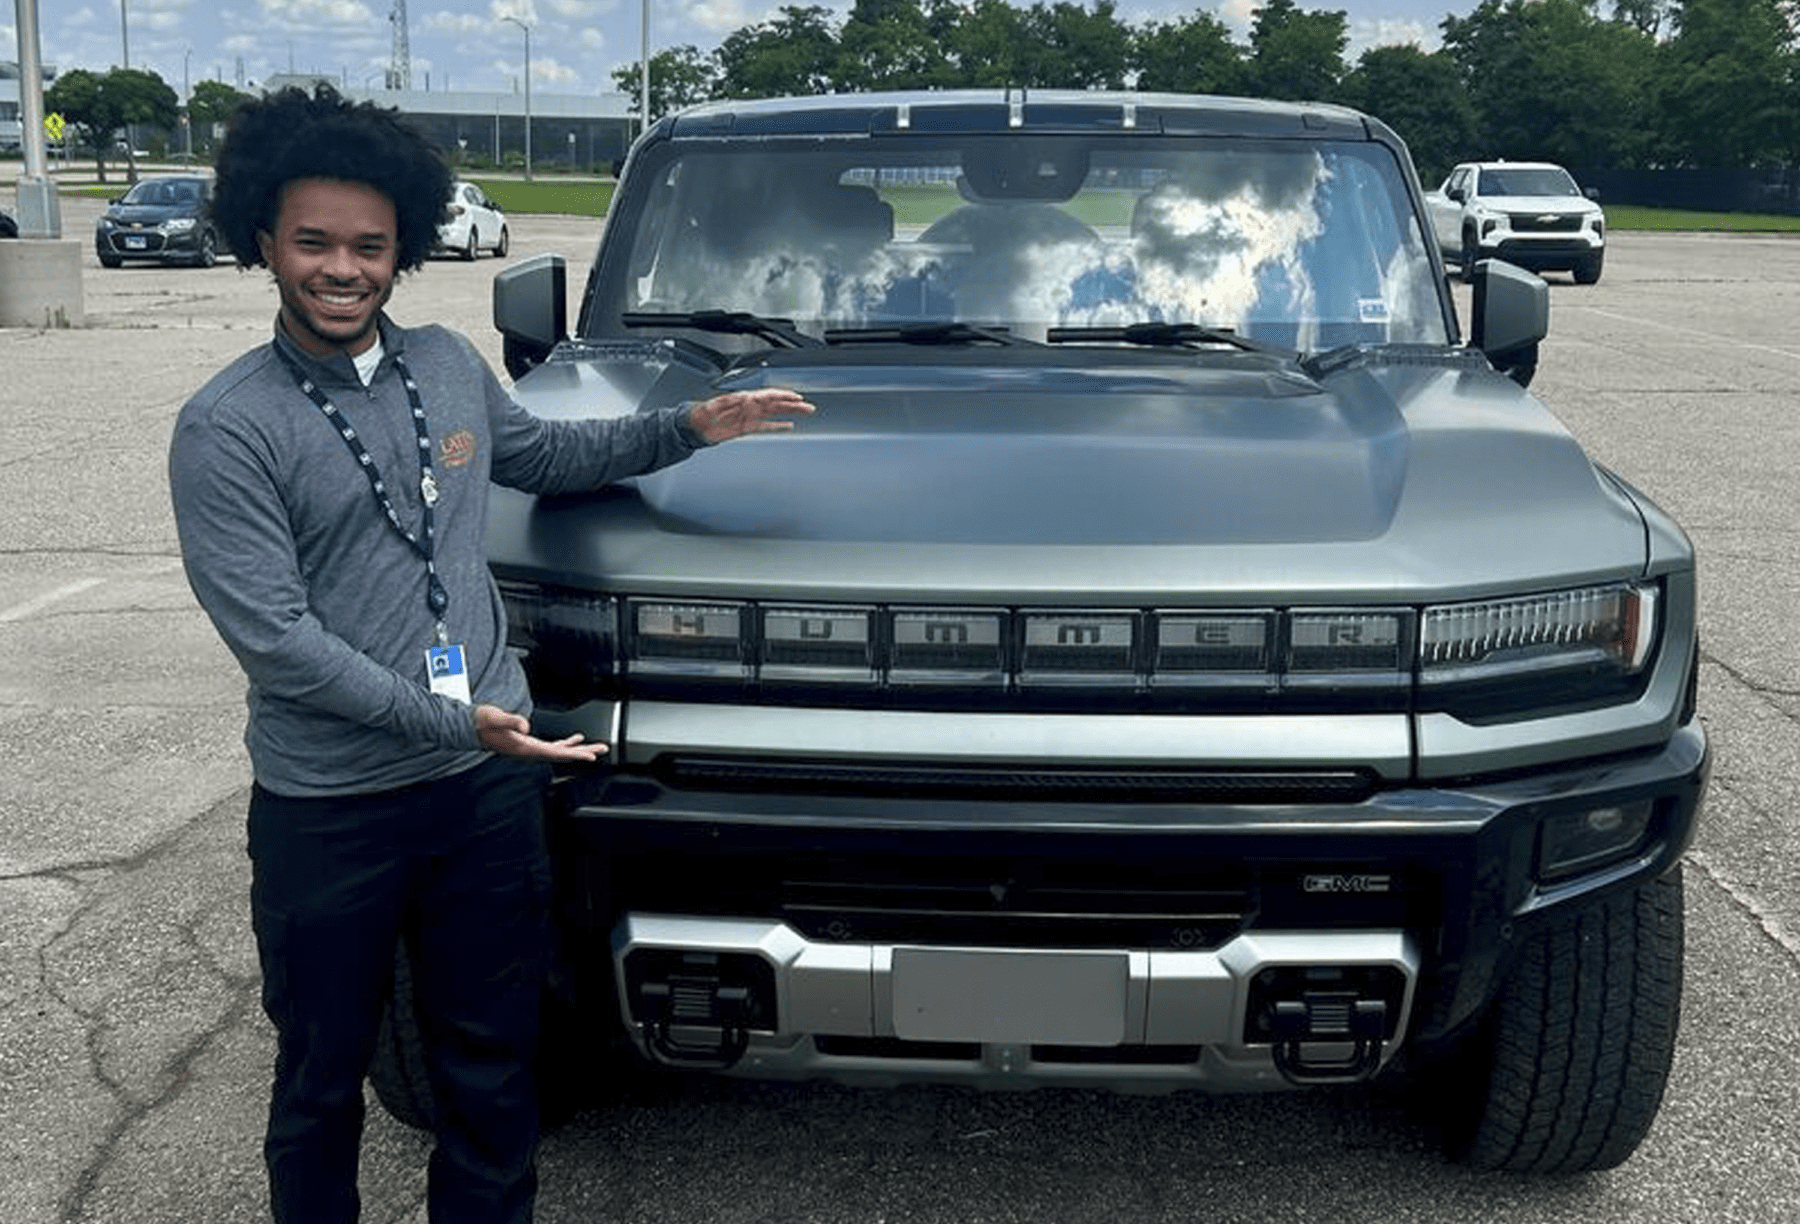 A young black man in dark pants and a gray shirt stands in front of a Hummer SUV, made by General Motors, with his arms open.